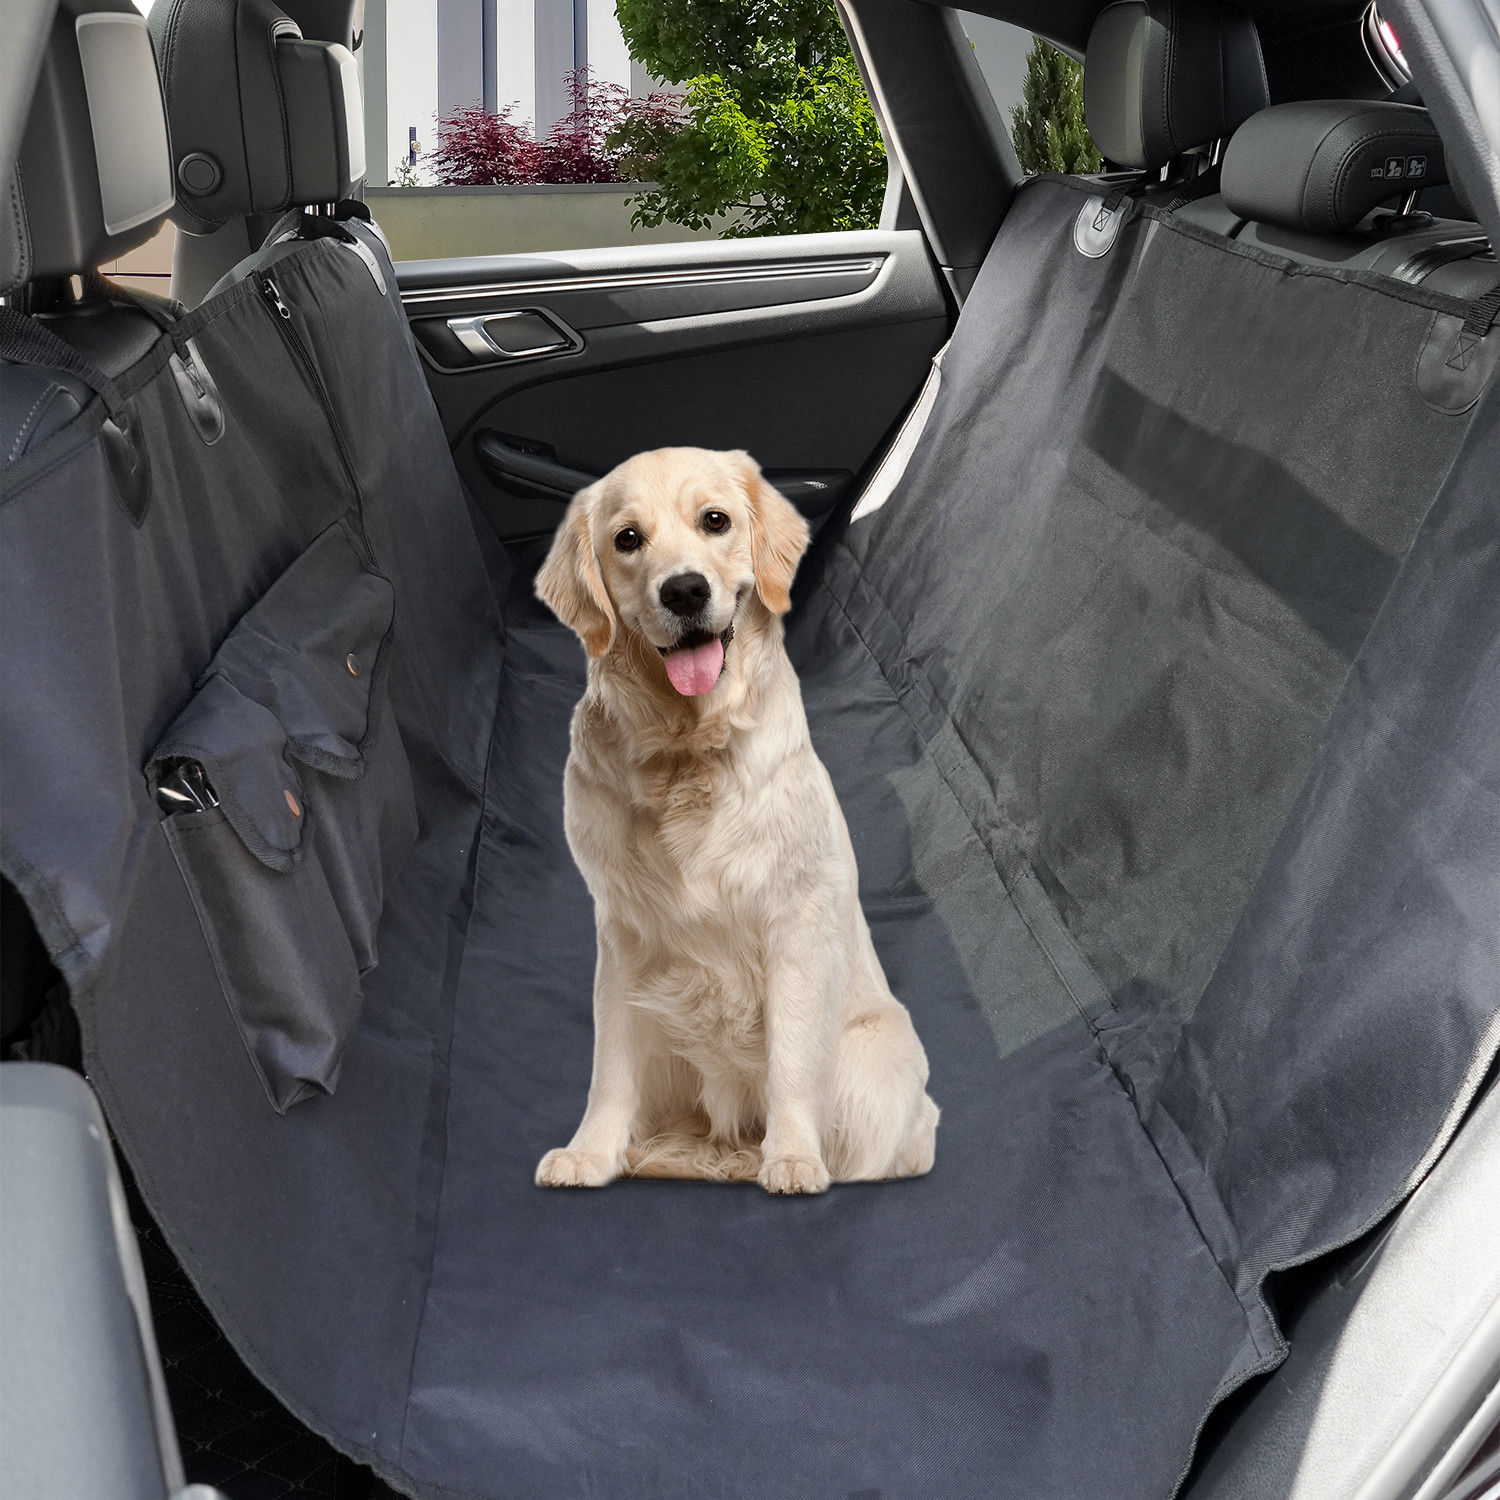  Dog Car Seat Cover for Back Seat, Waterproof Pet Dog Seat Cover for SUV 100% Scratchproof Nonslip Manufactures